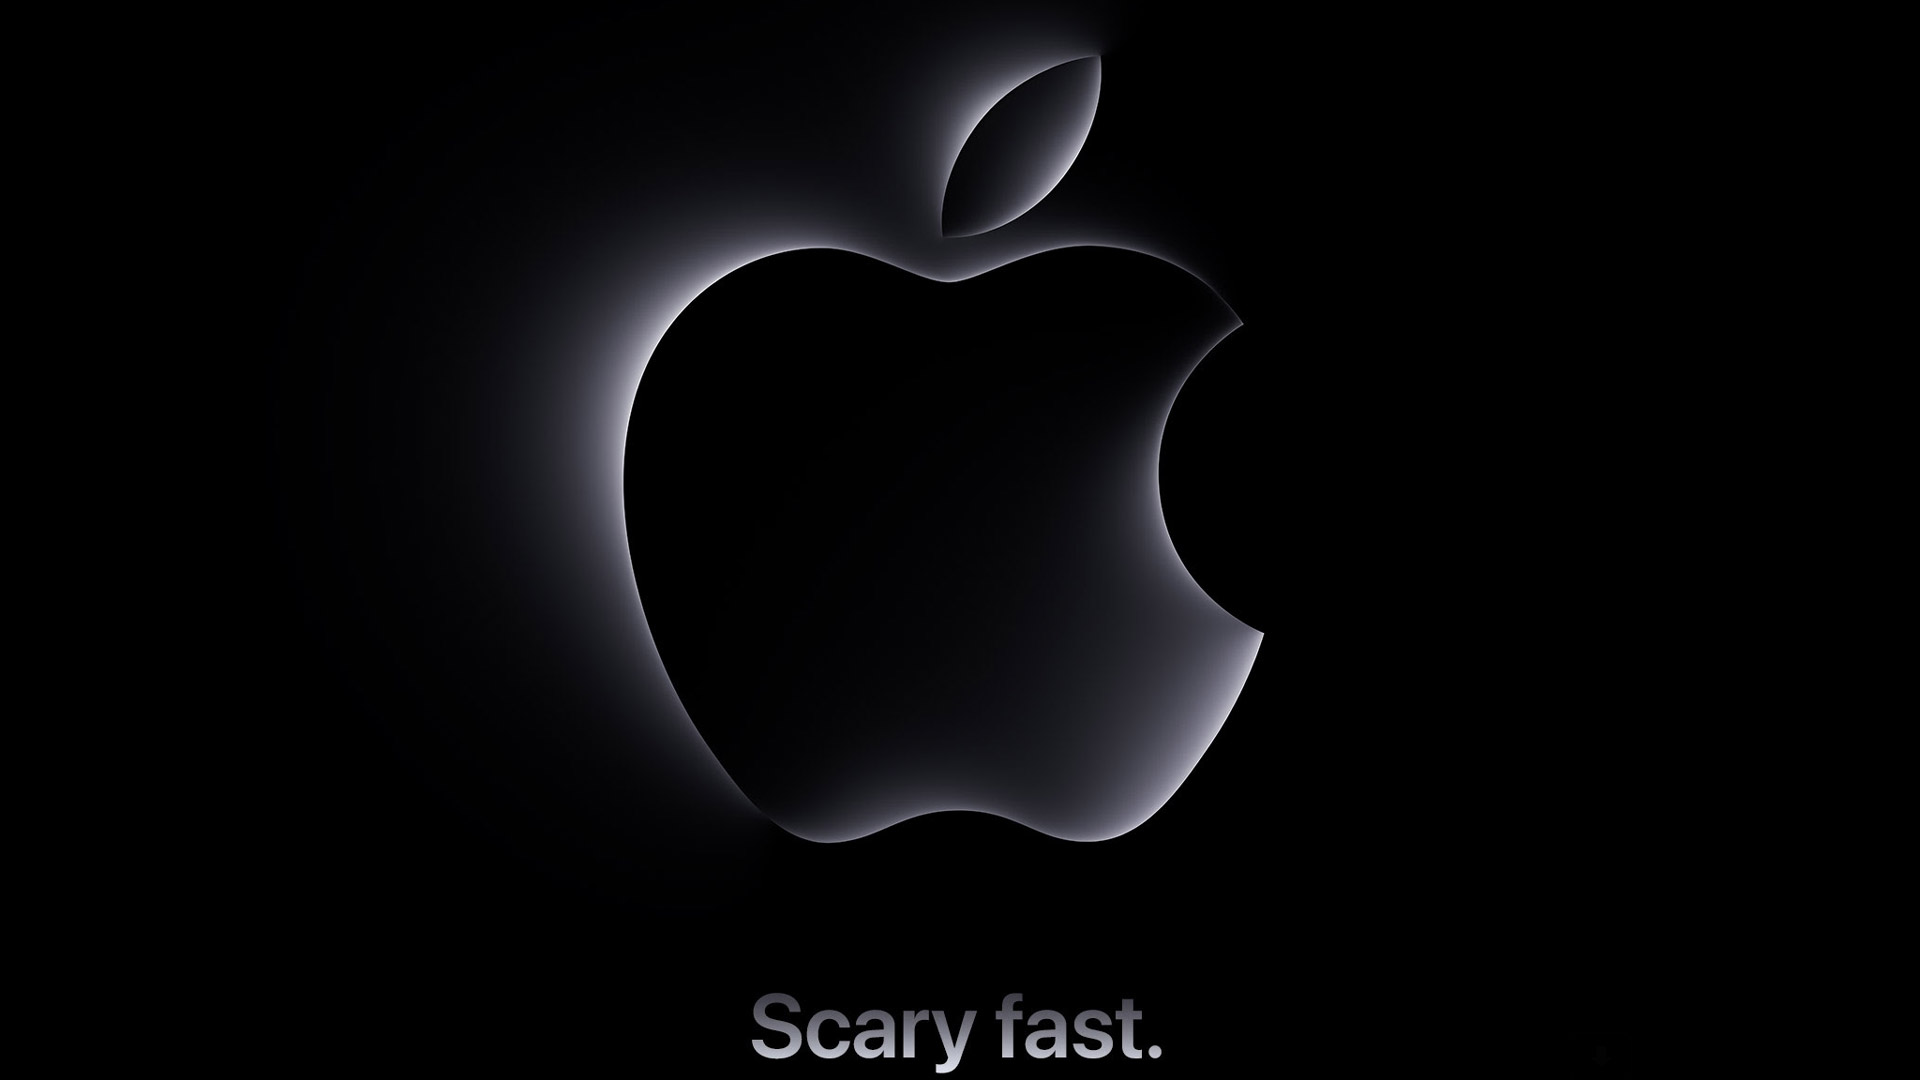 Apple treats us to ‘Scary Fast October event that could